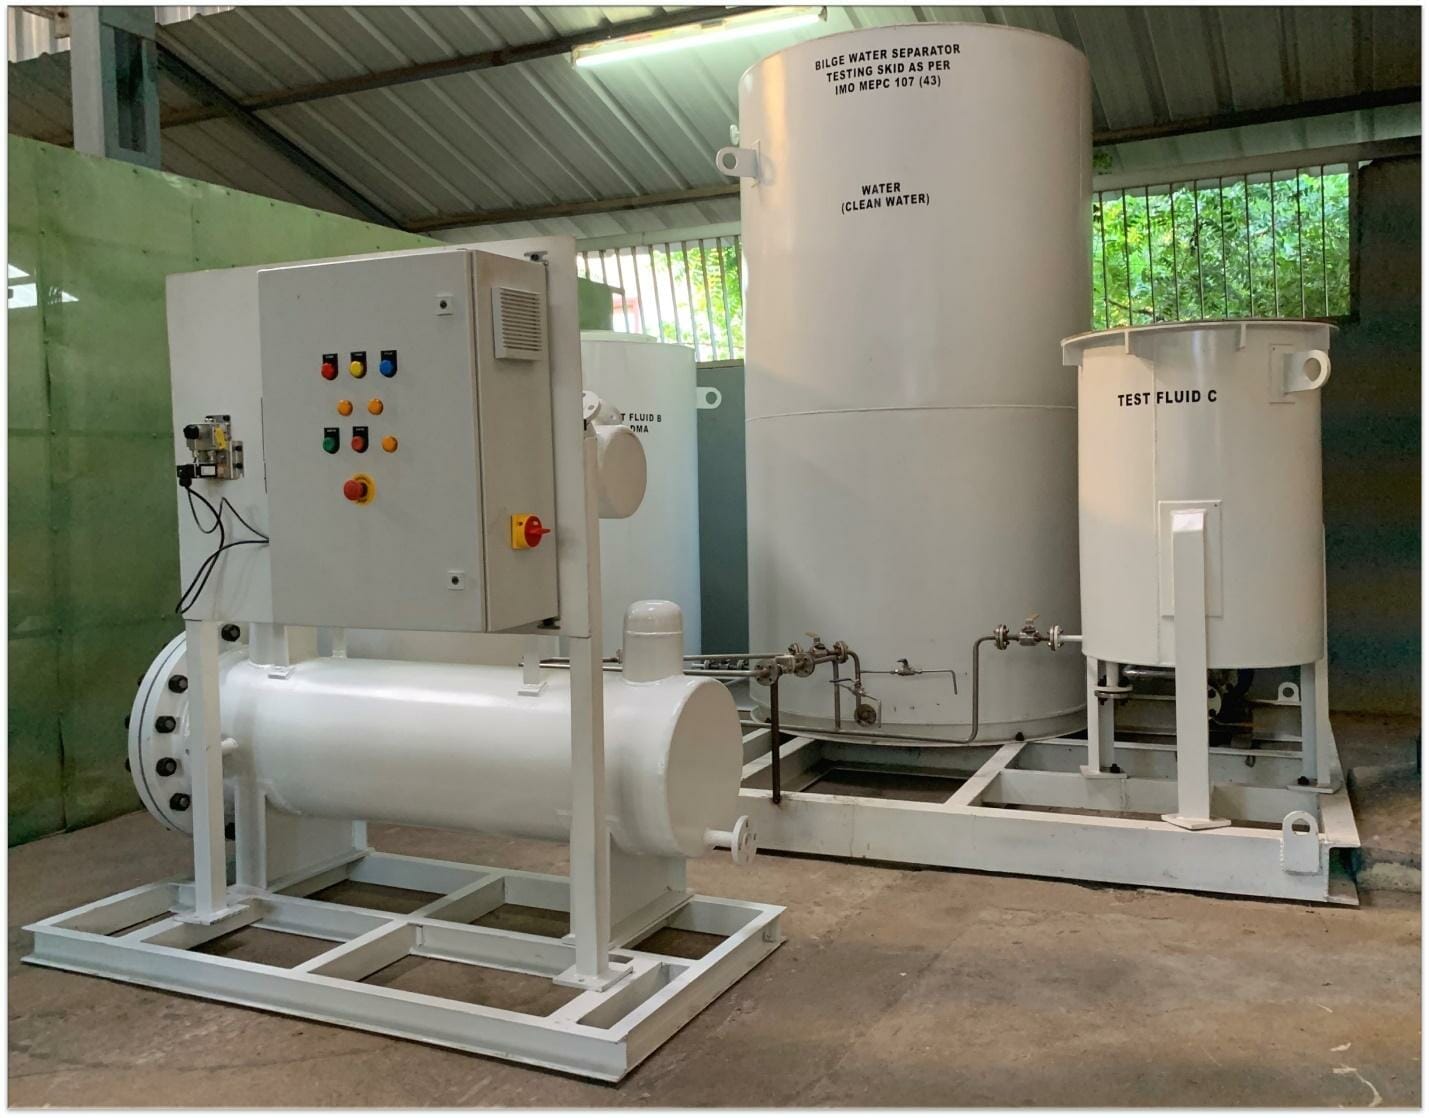 Bilge-water separator test rig to validate performance of our oily water separators as per IMO MEPC 107 (43)